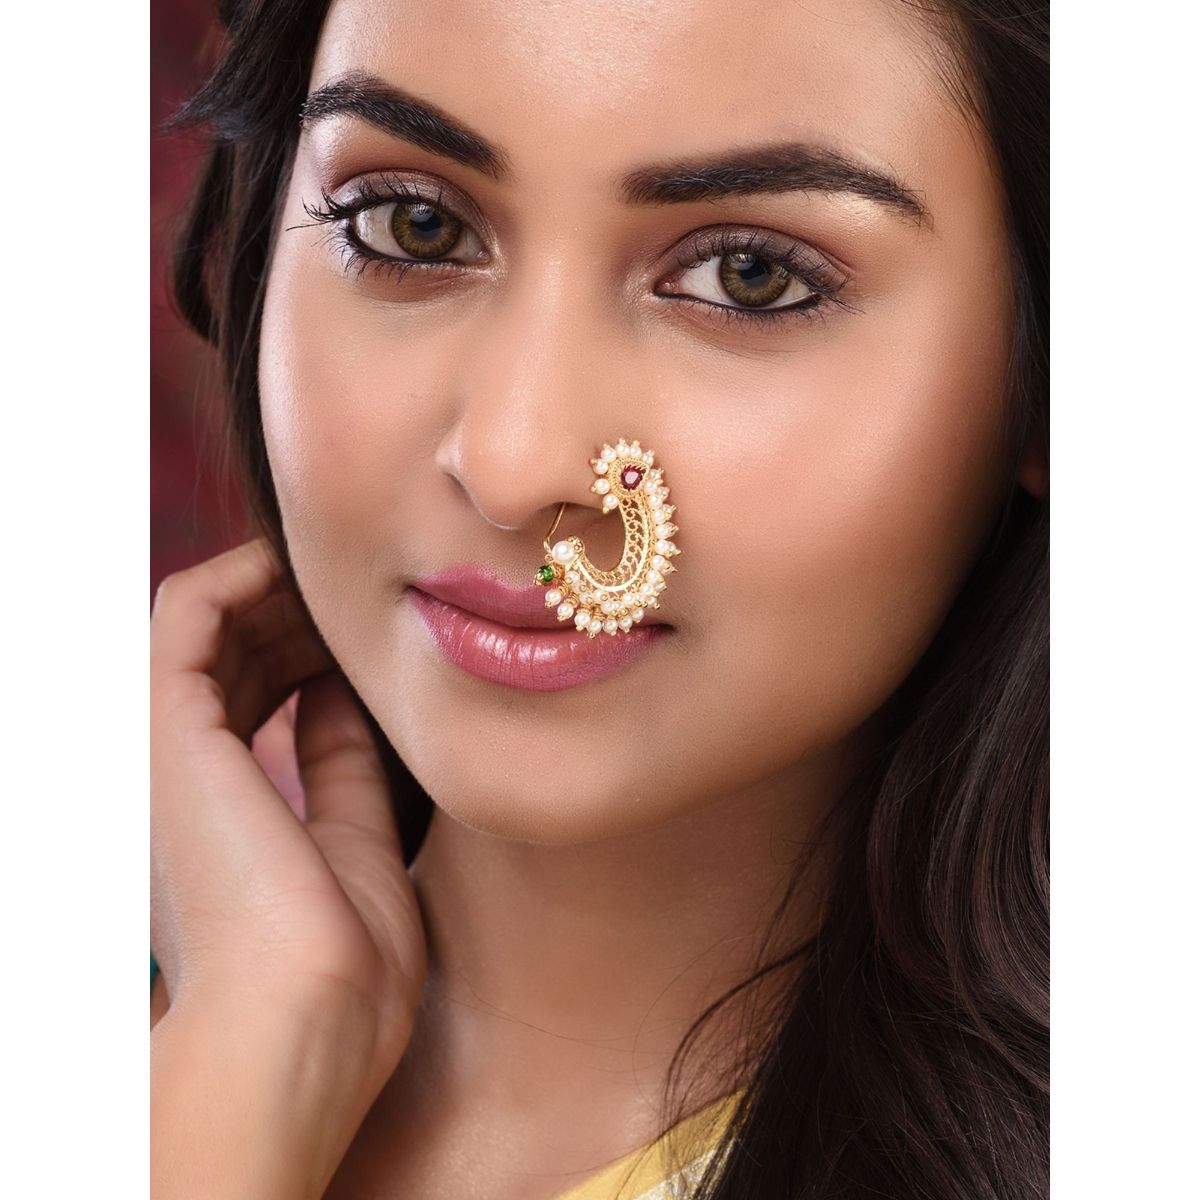 Buy MEENAZ Maharashtrian Temple Banu marathi Nose pin Nath Nose Ring for  Wedding Women Girls design Traditional Pearl Jewellery Combo Gold plated  pierced (2 pcs) -NATH COMBO-129 at Amazon.in